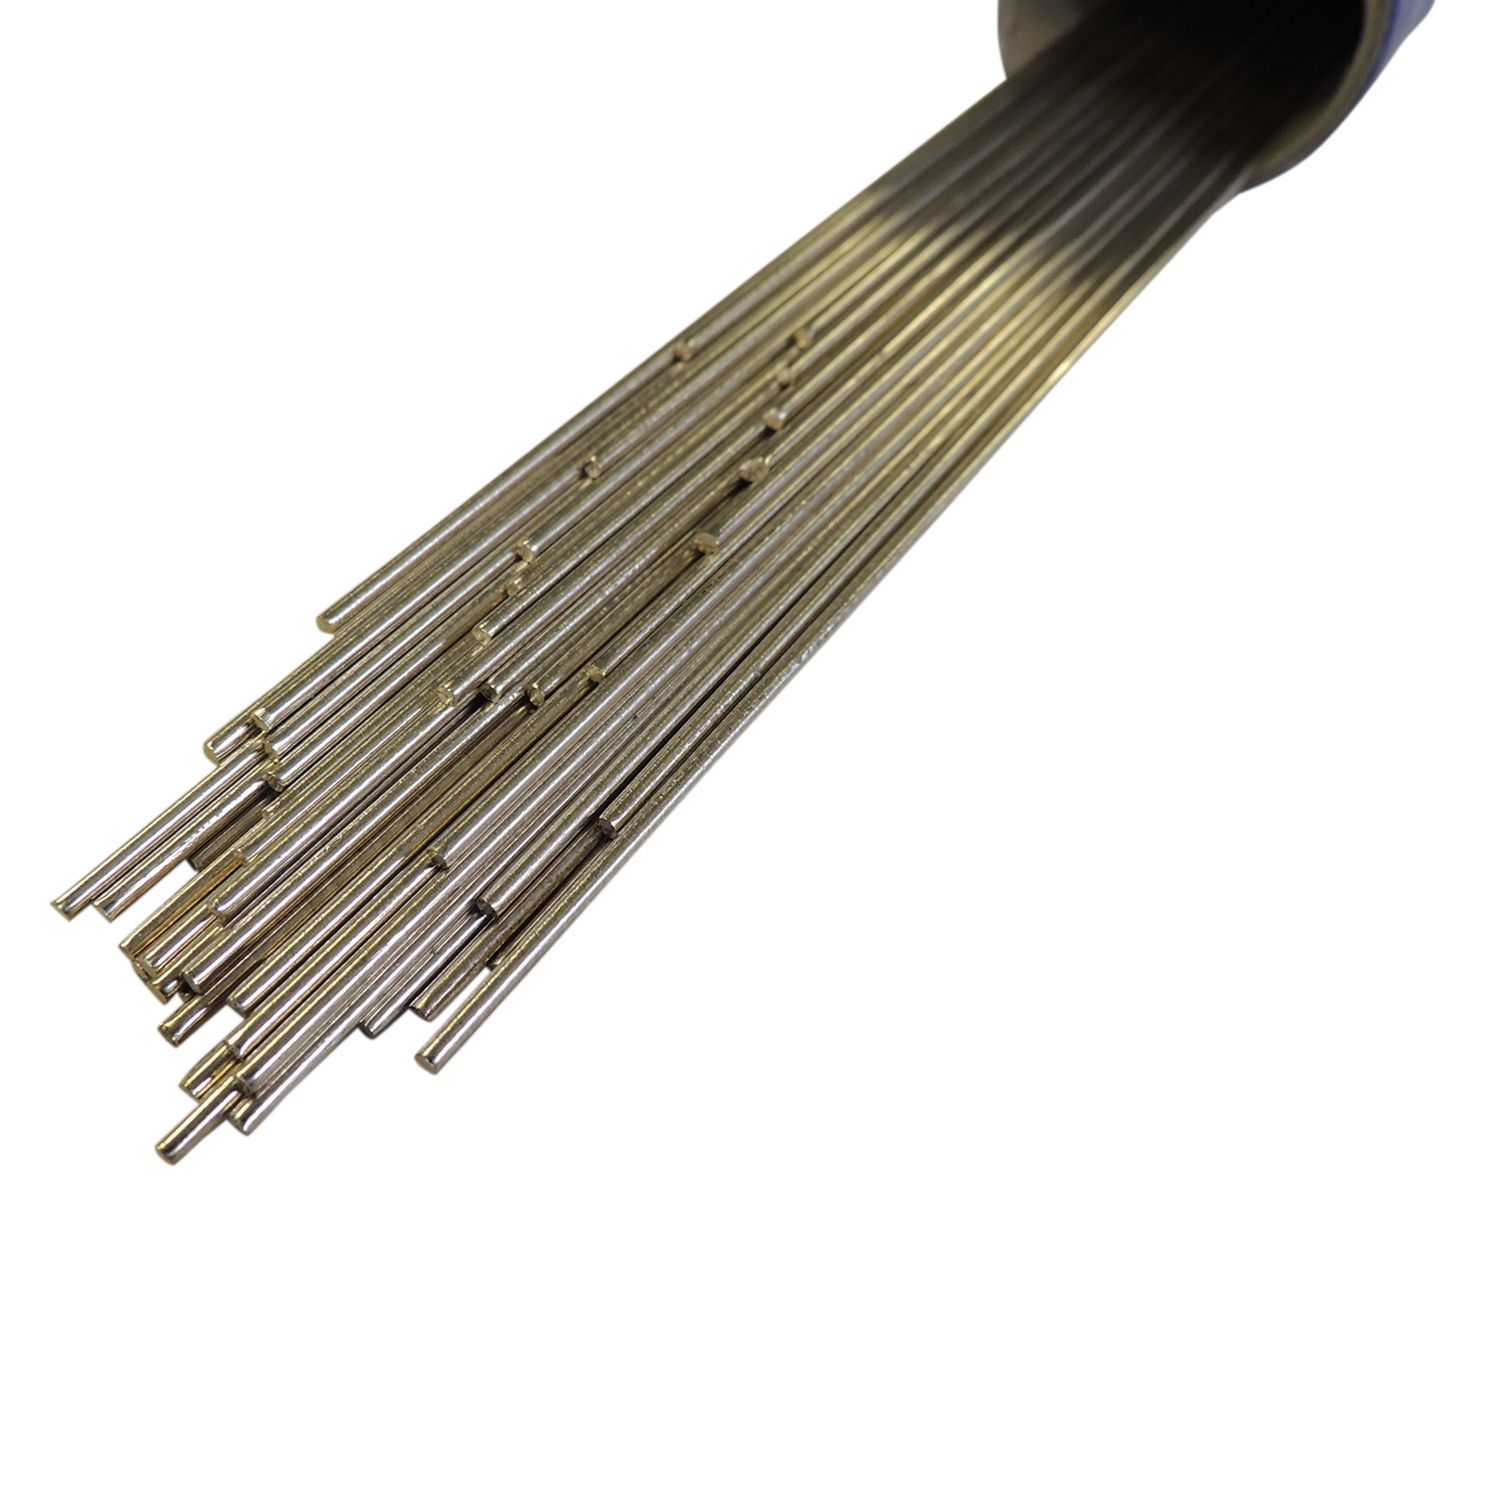 Silver solder rods 1,5mm dia 55% silver 630 to 660 C